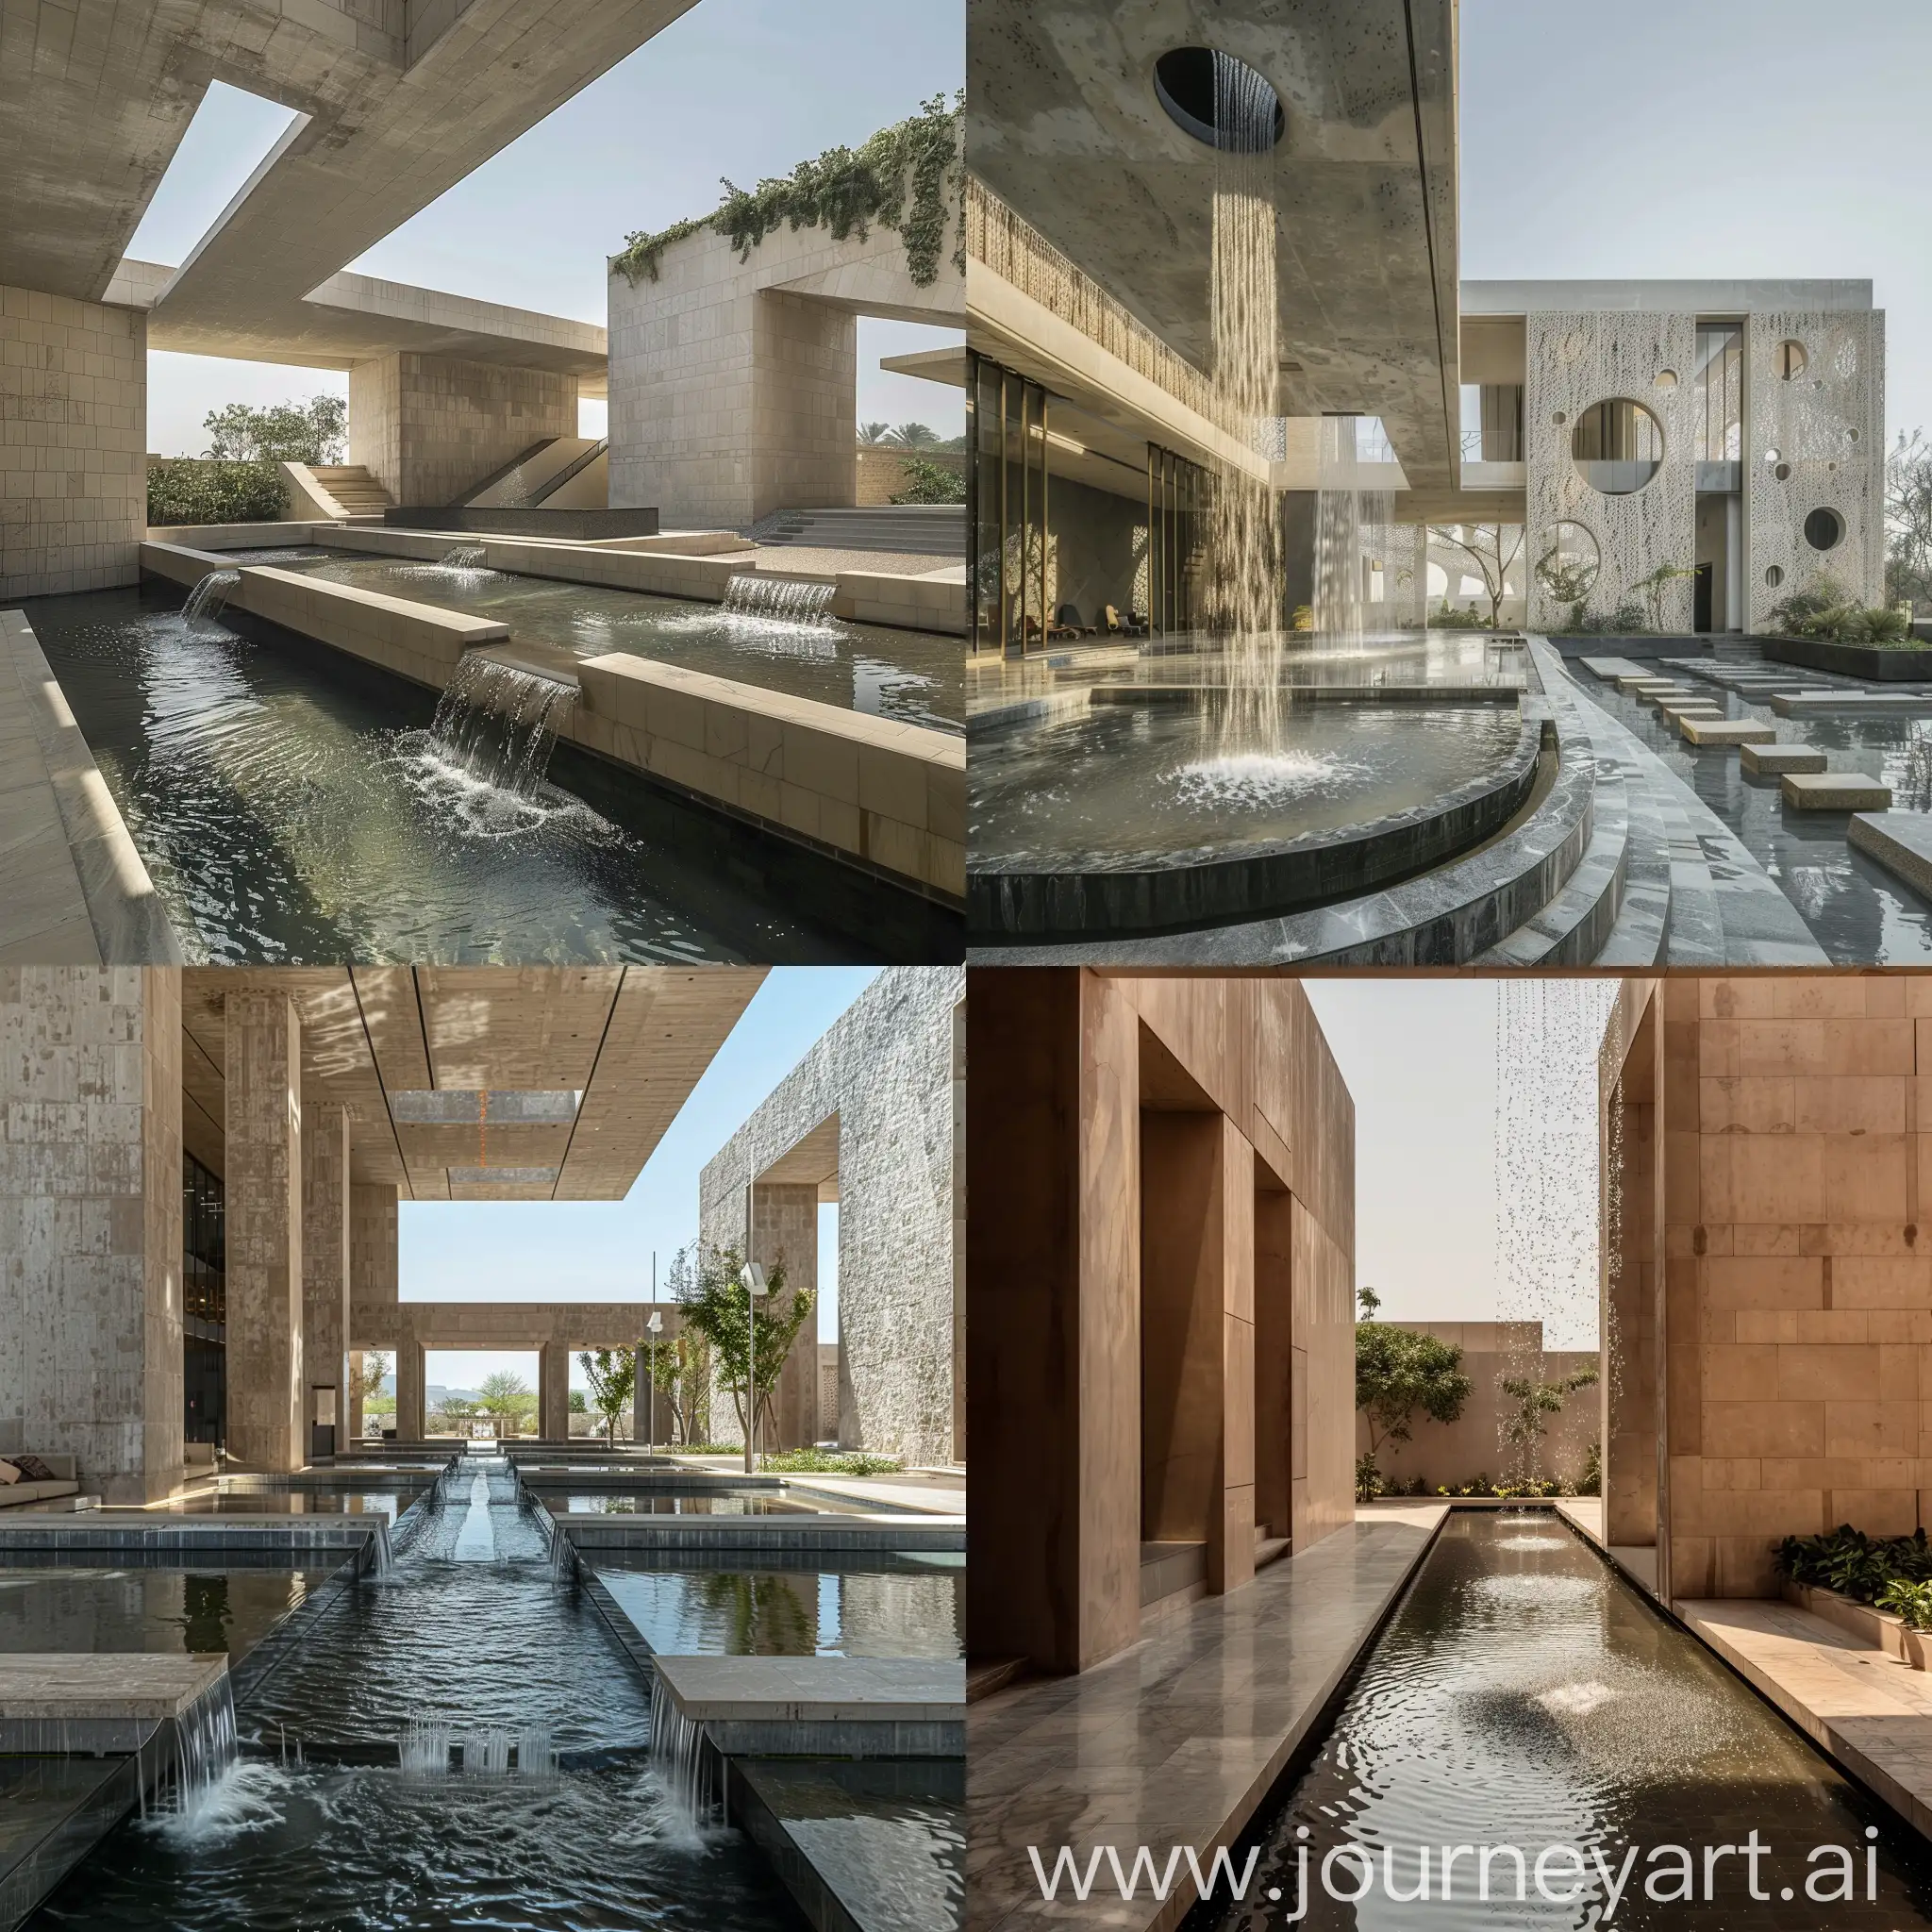 Step into a world of contemporary elegance as you enter this public space in Rajasthan, featuring a stunning water feature and cutting-edge design.